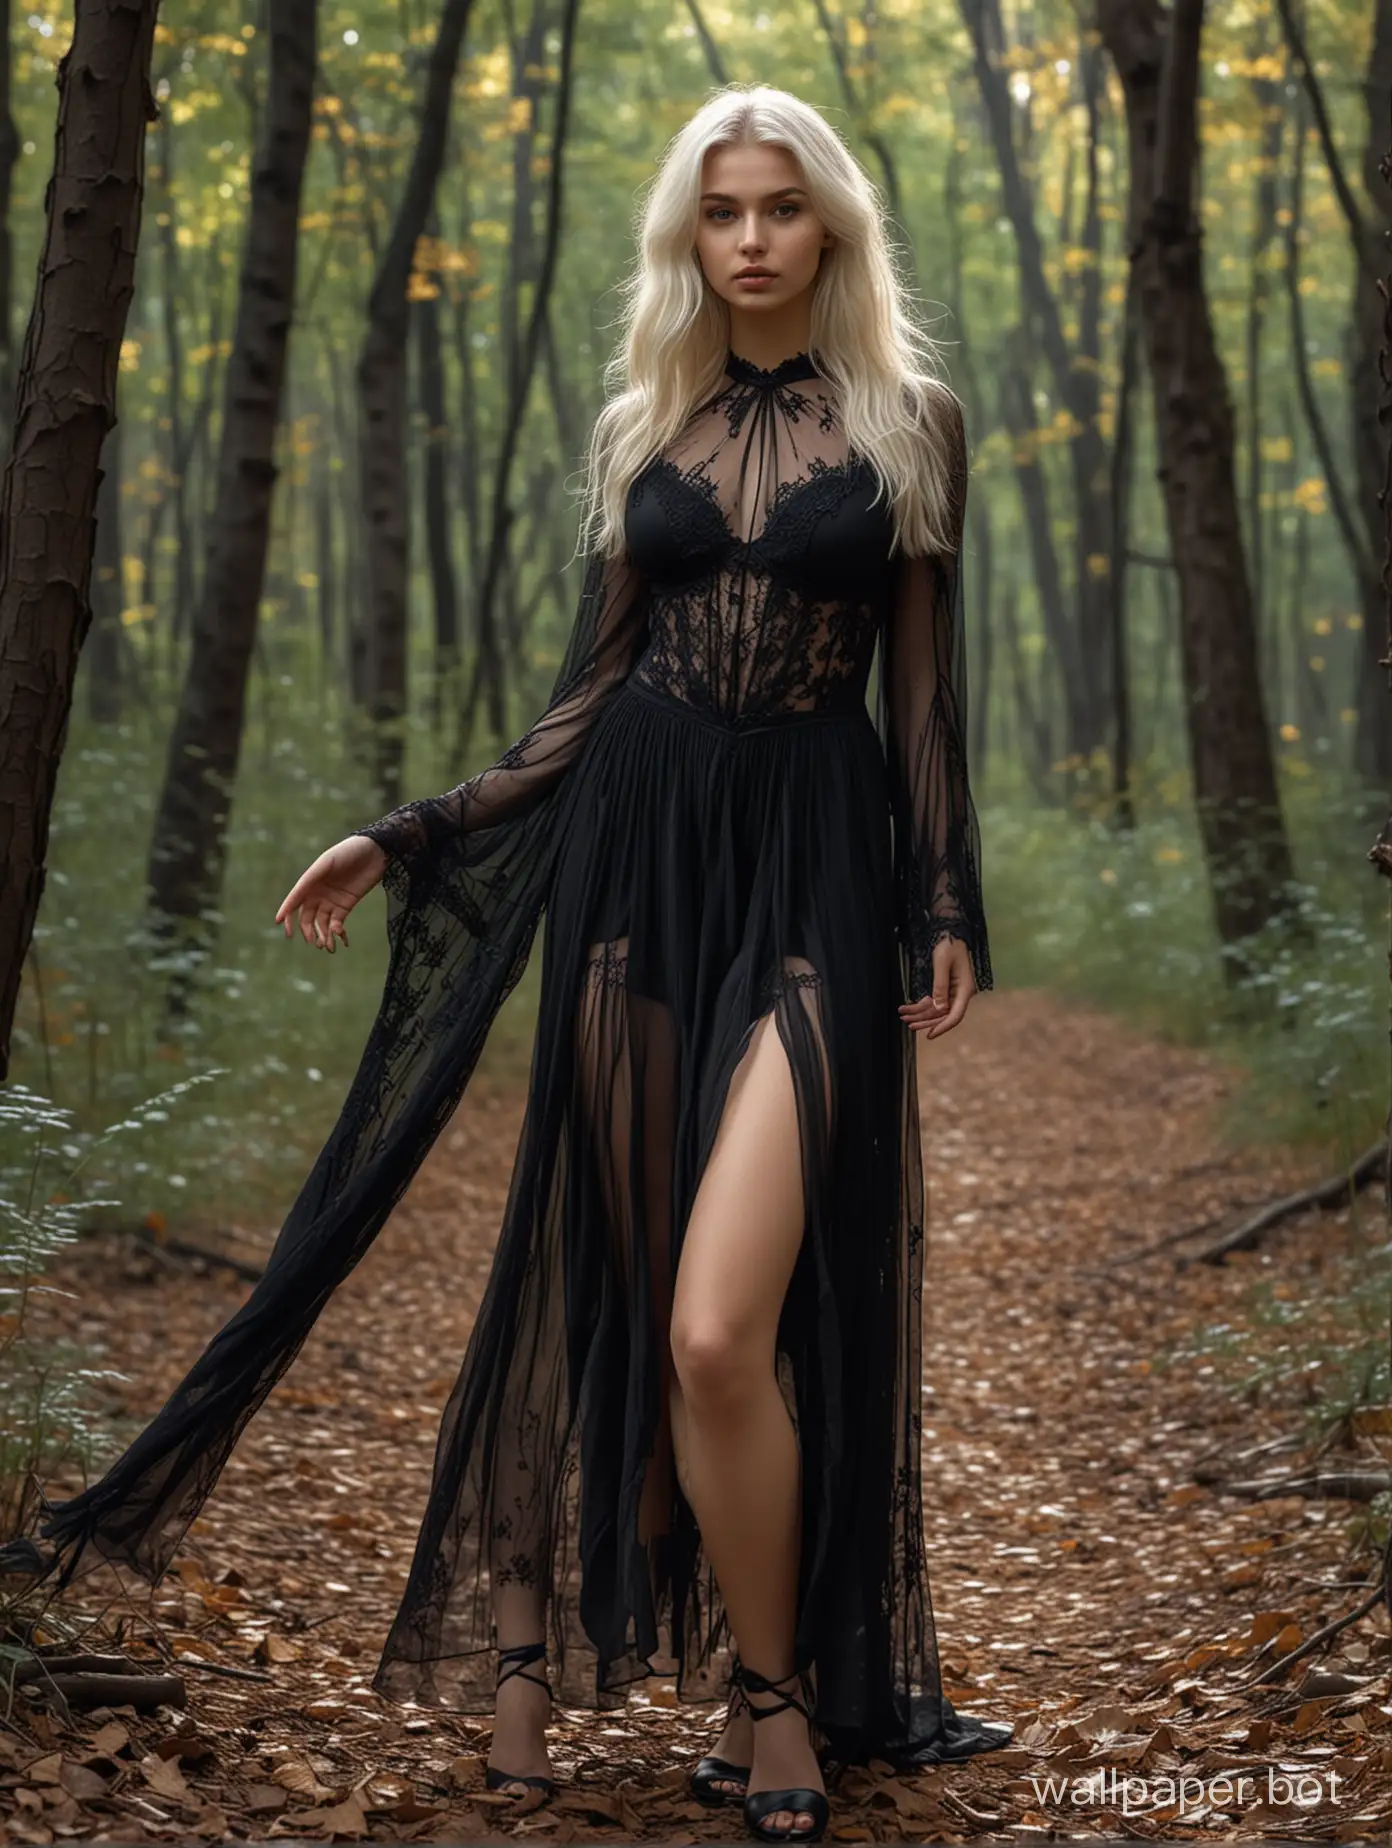 Stunning-Russian-Model-in-Enchanting-Black-Wizard-Dress-Amid-Forest-Wilderness